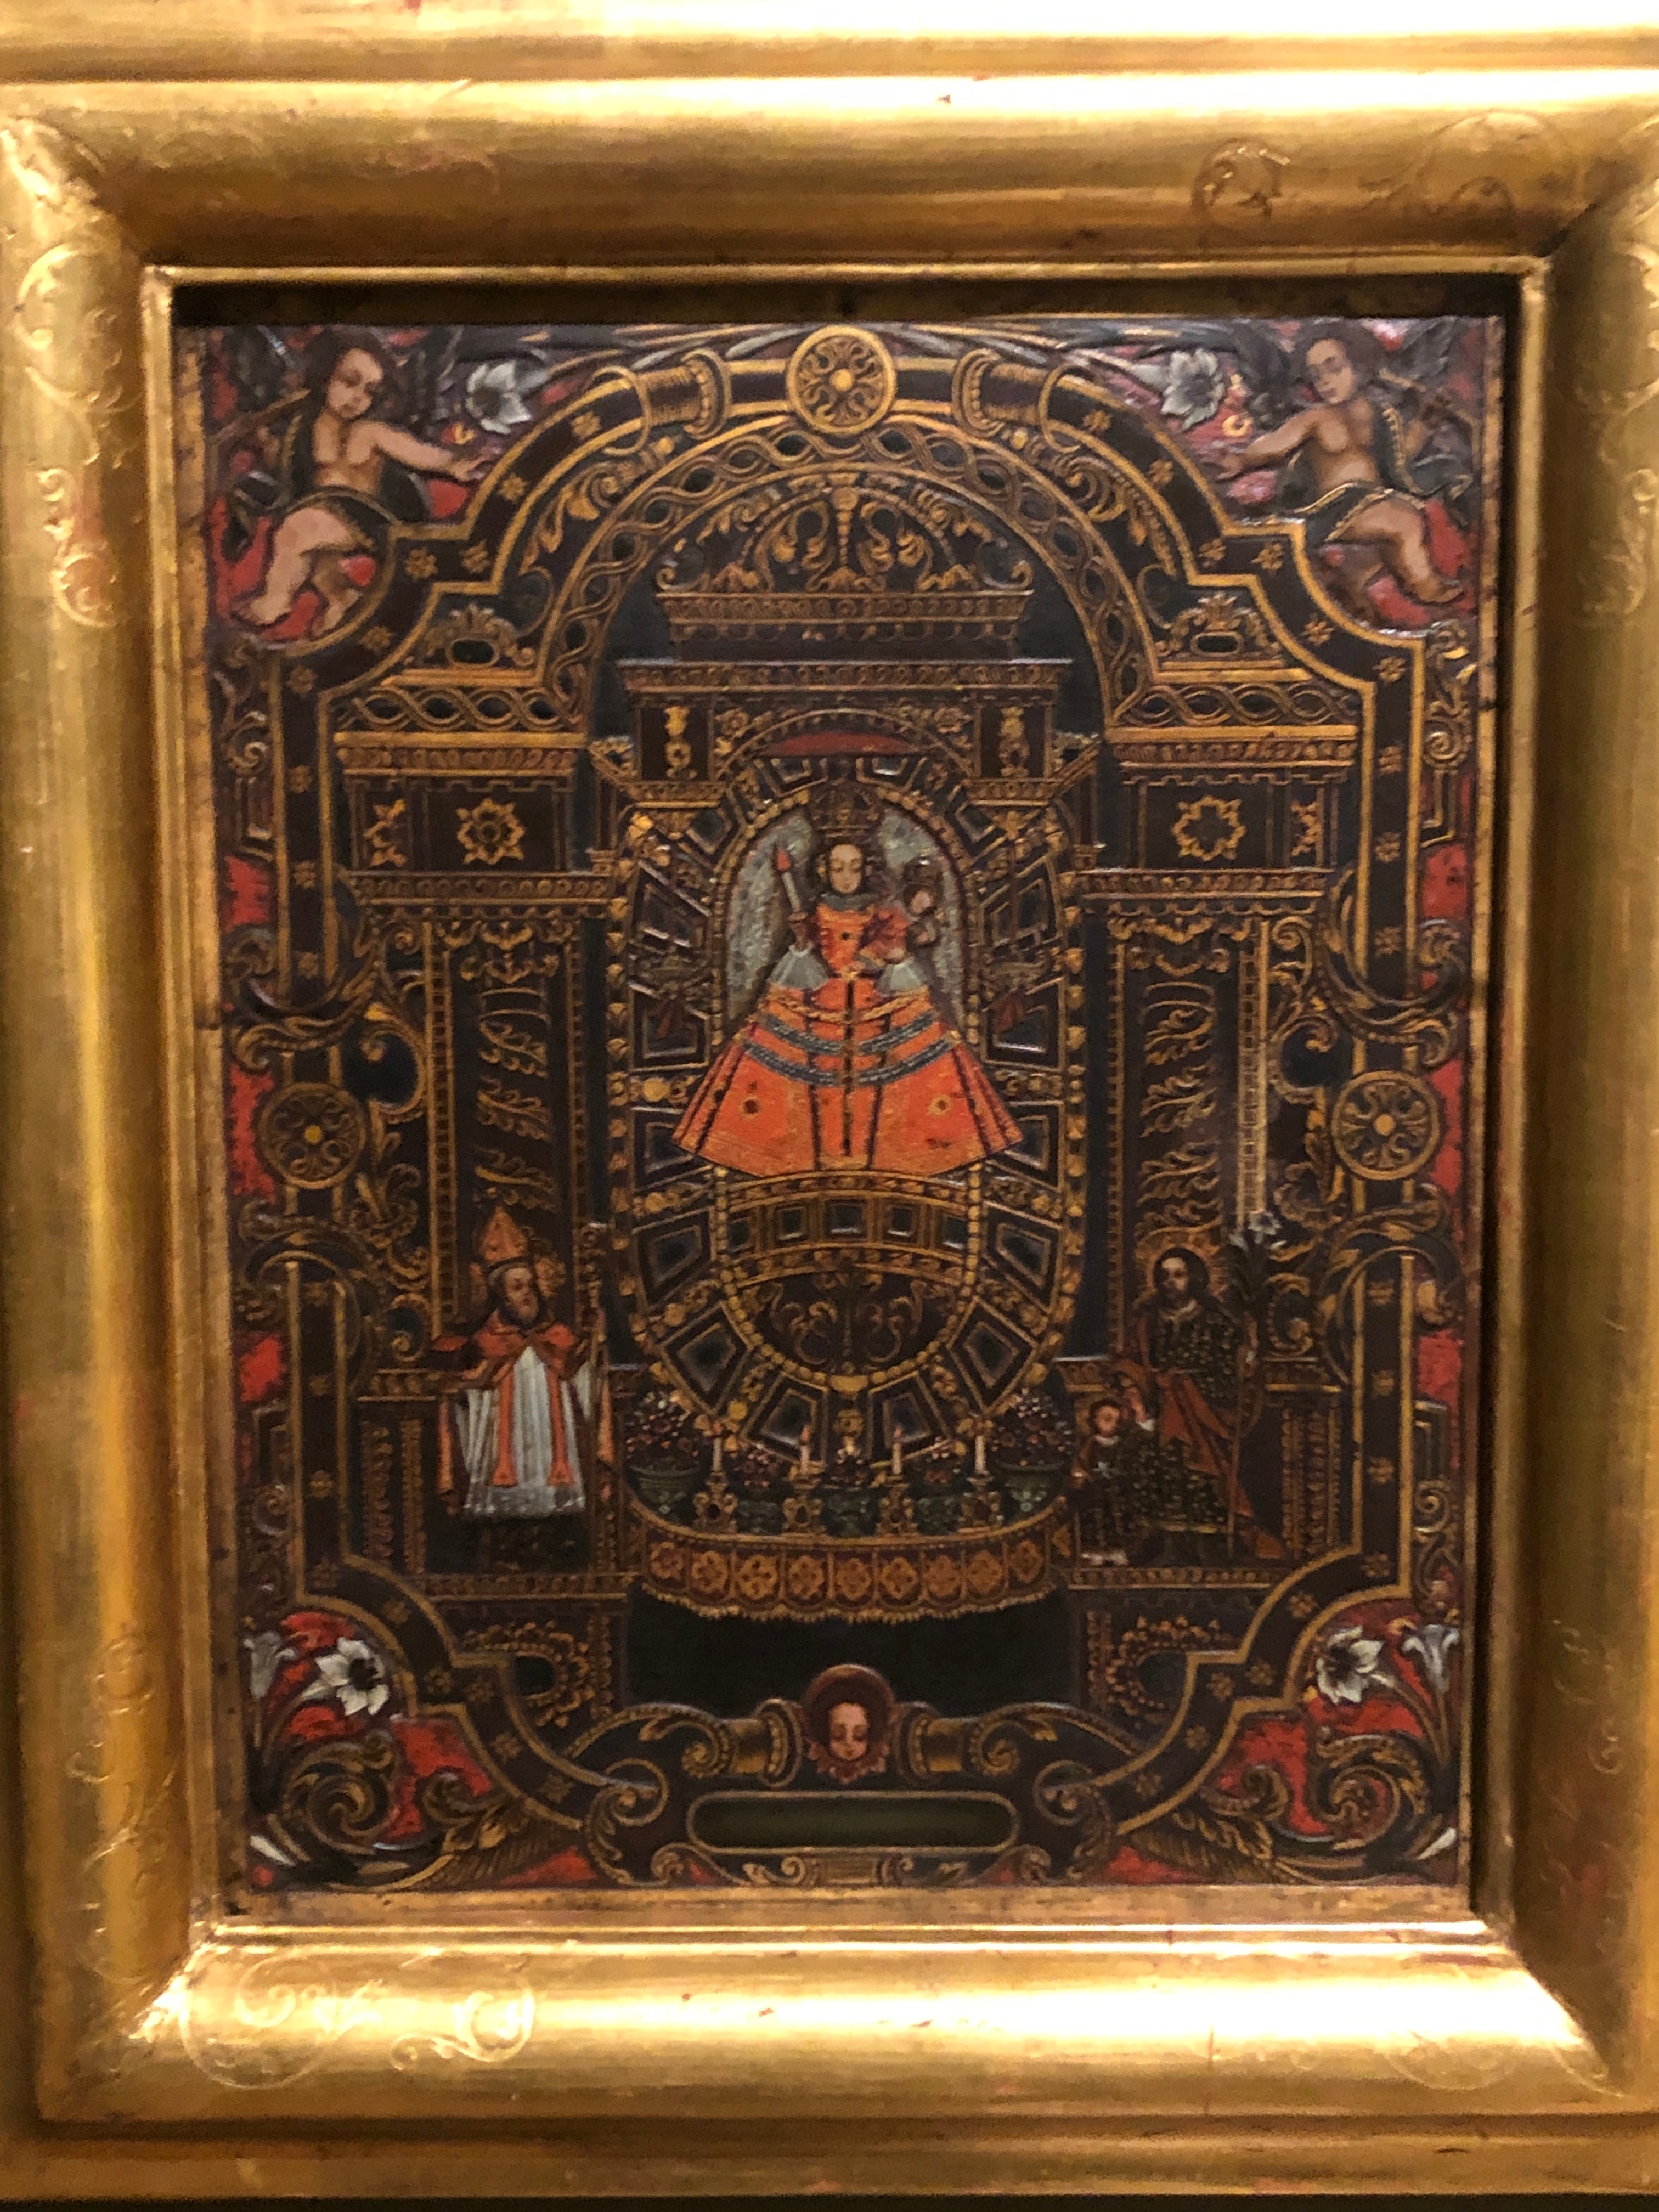 oil and gold on a copper plate image of Nuestra Señora de Copacabana